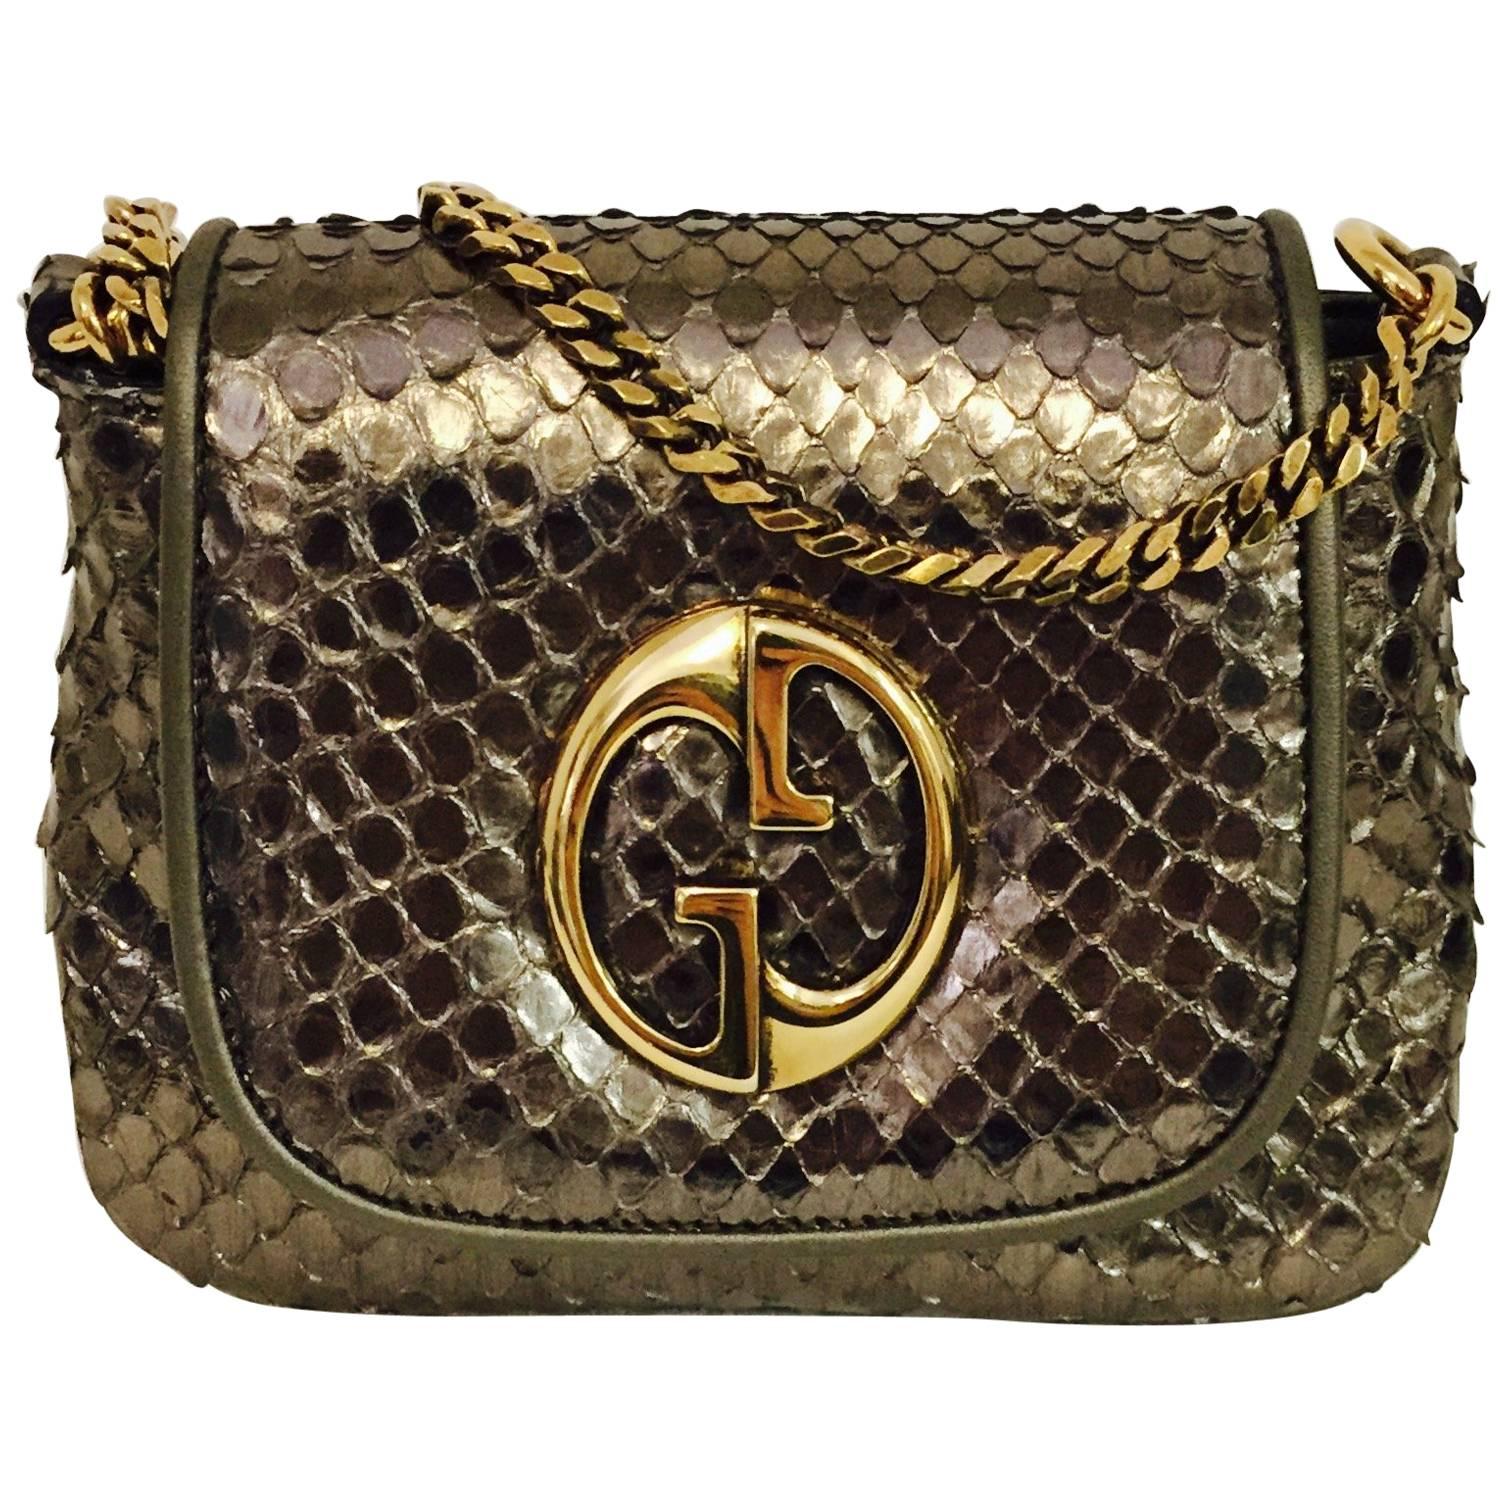 Gucci Cross body Python Bag with Gold Tone Chain, 1973 